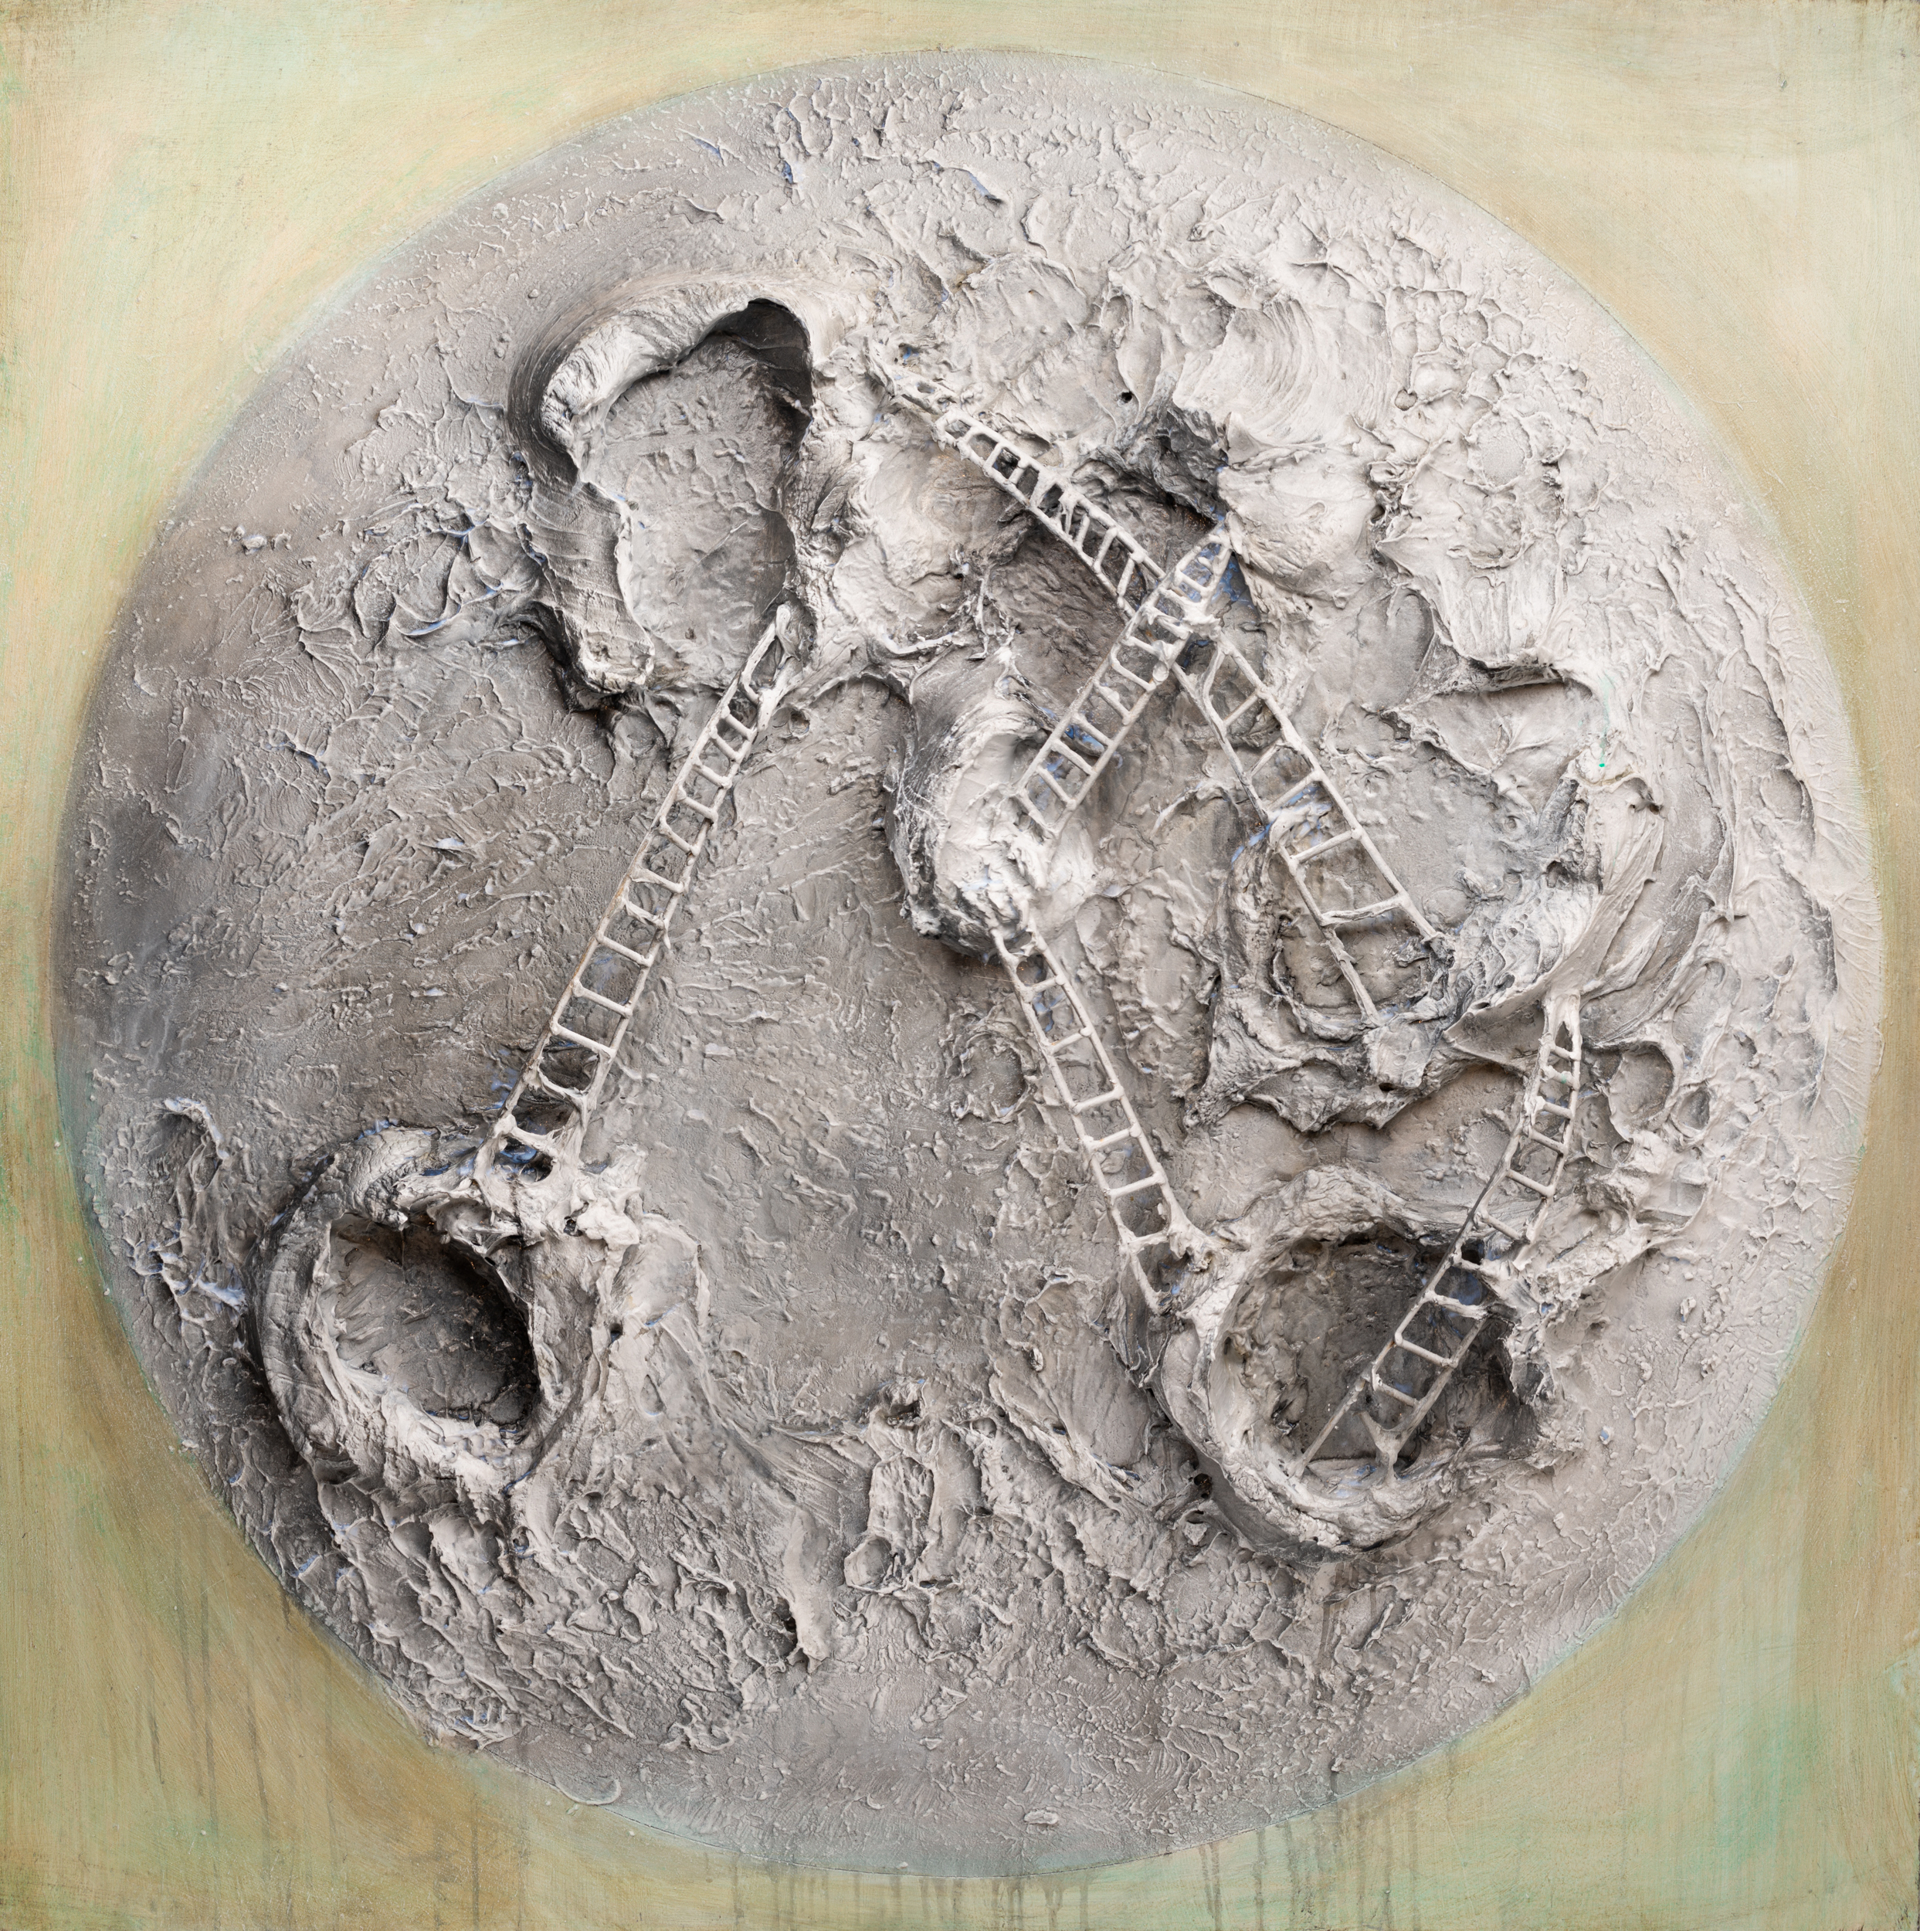 MOON AND LADDERS MS-60x60-2019-317 by JUSTIN GAFFREY